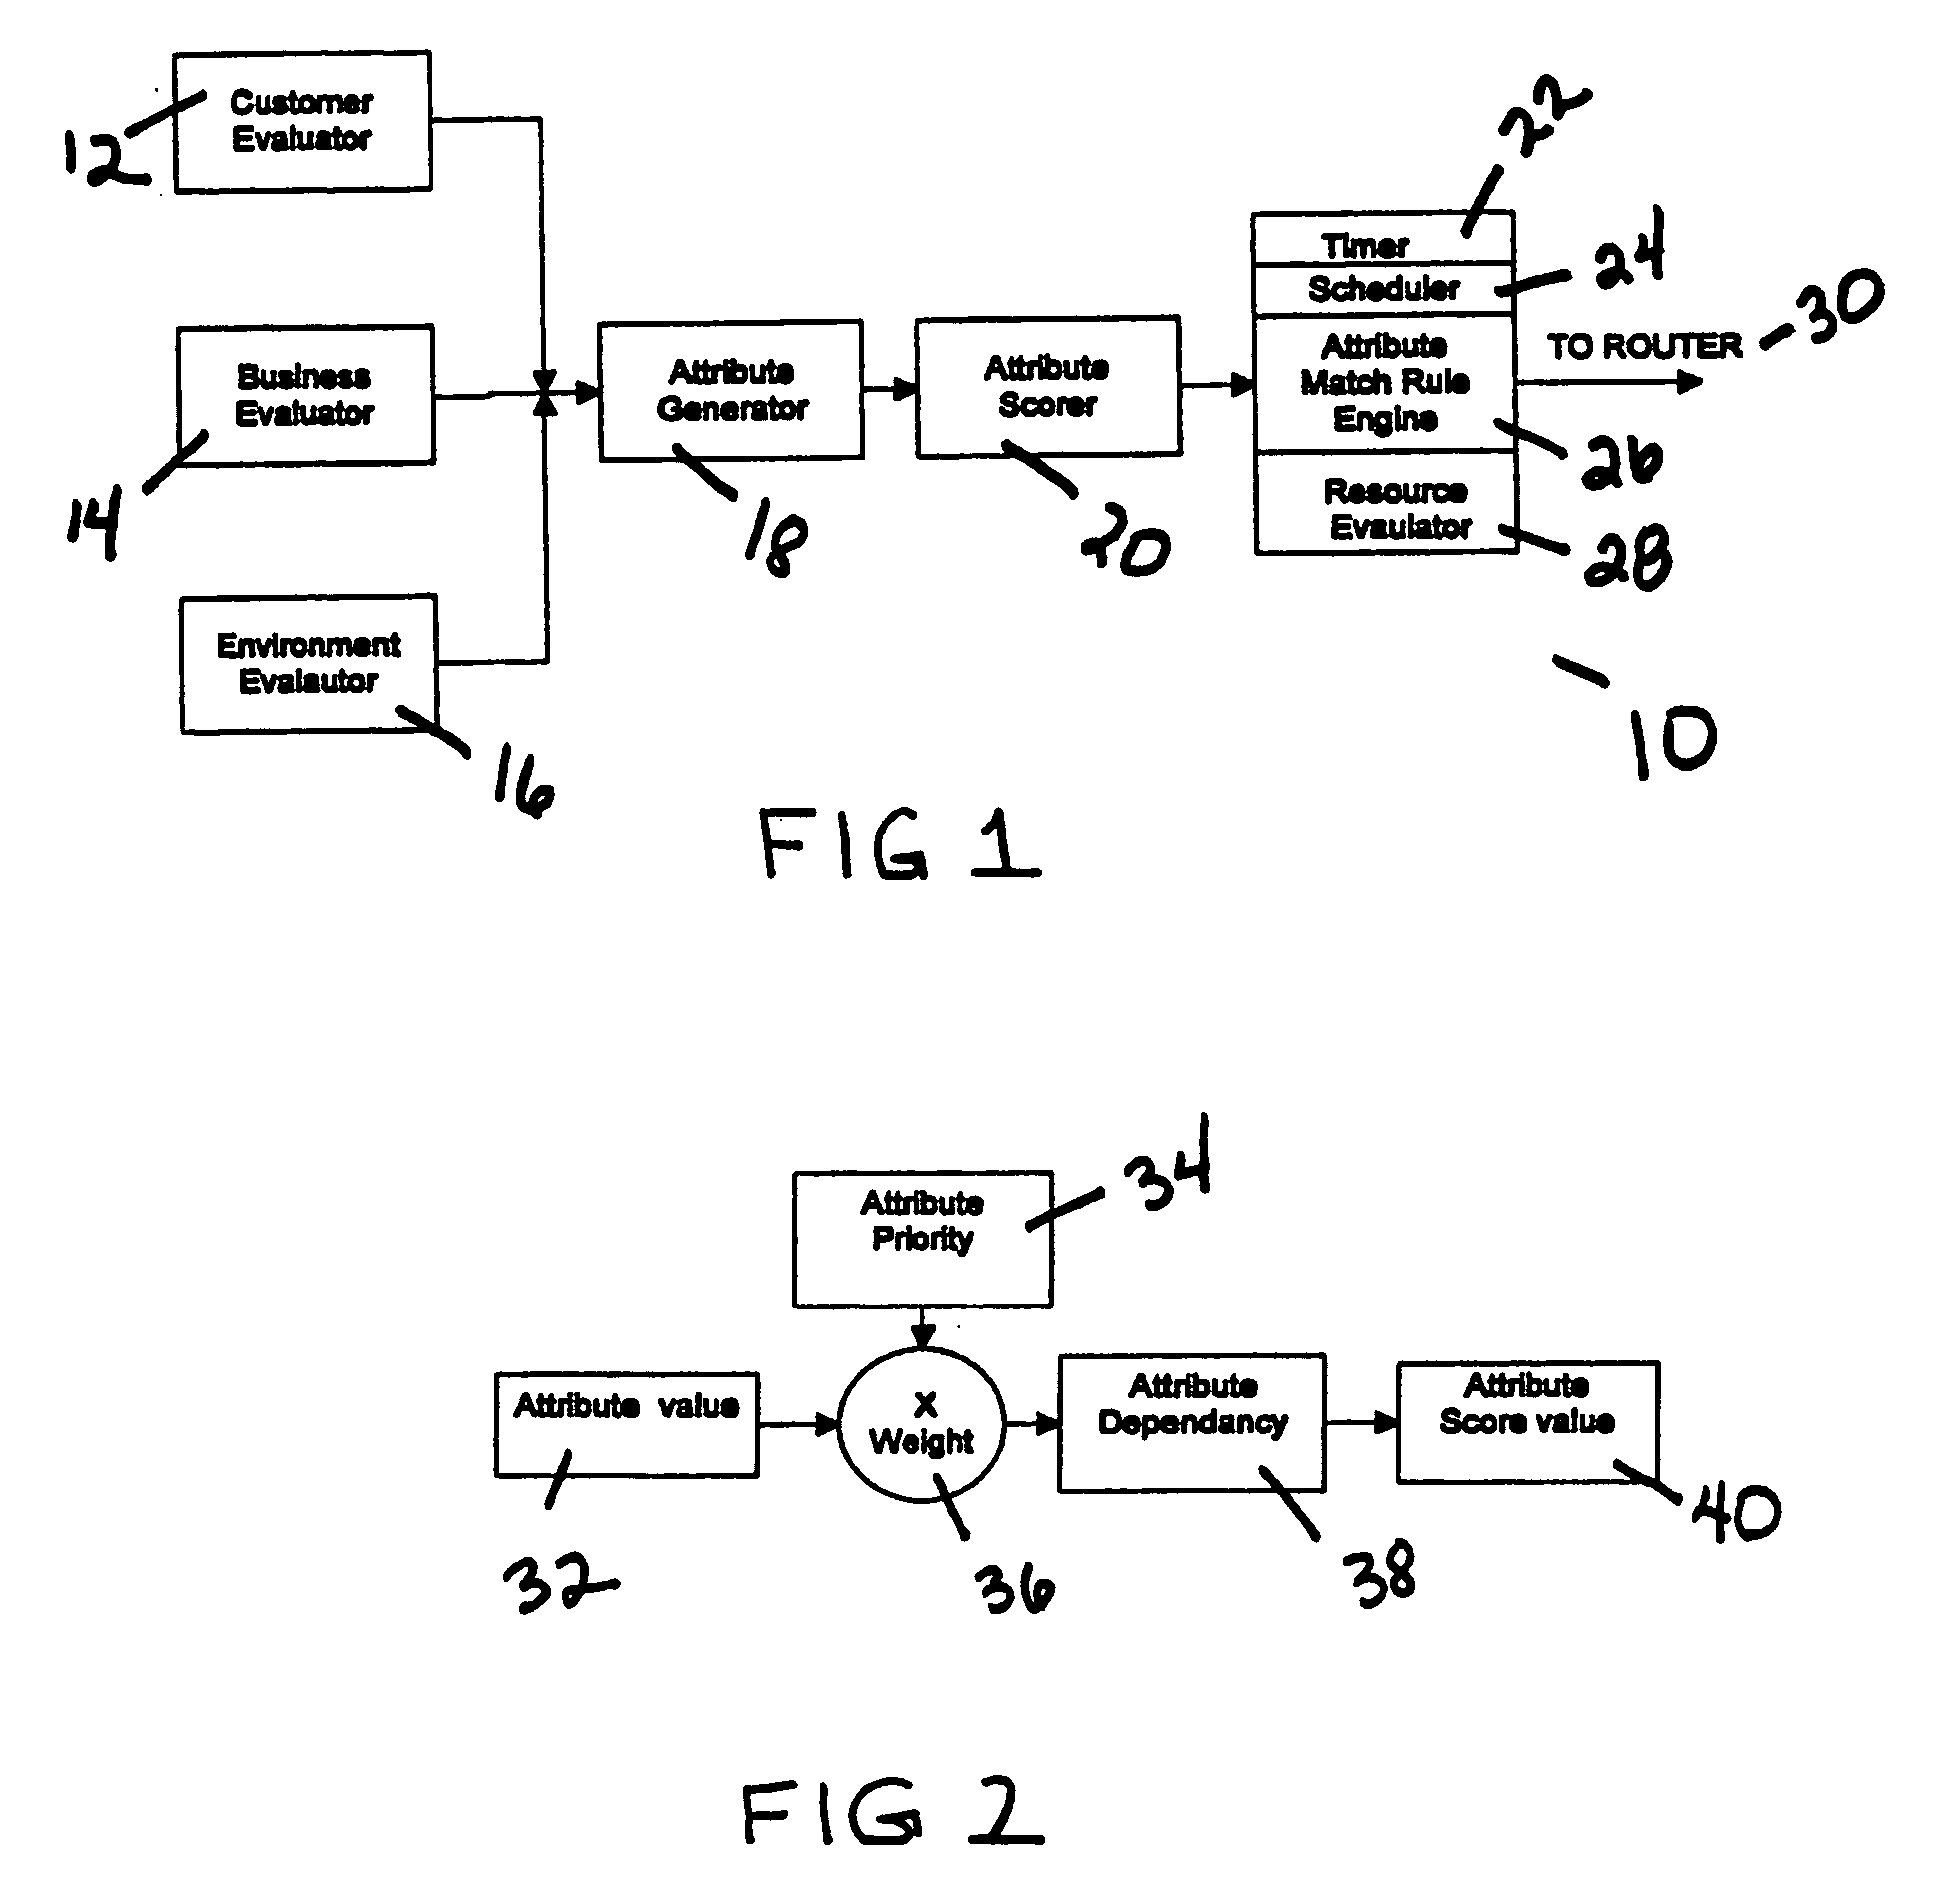 Method and apparatus for customer key routing